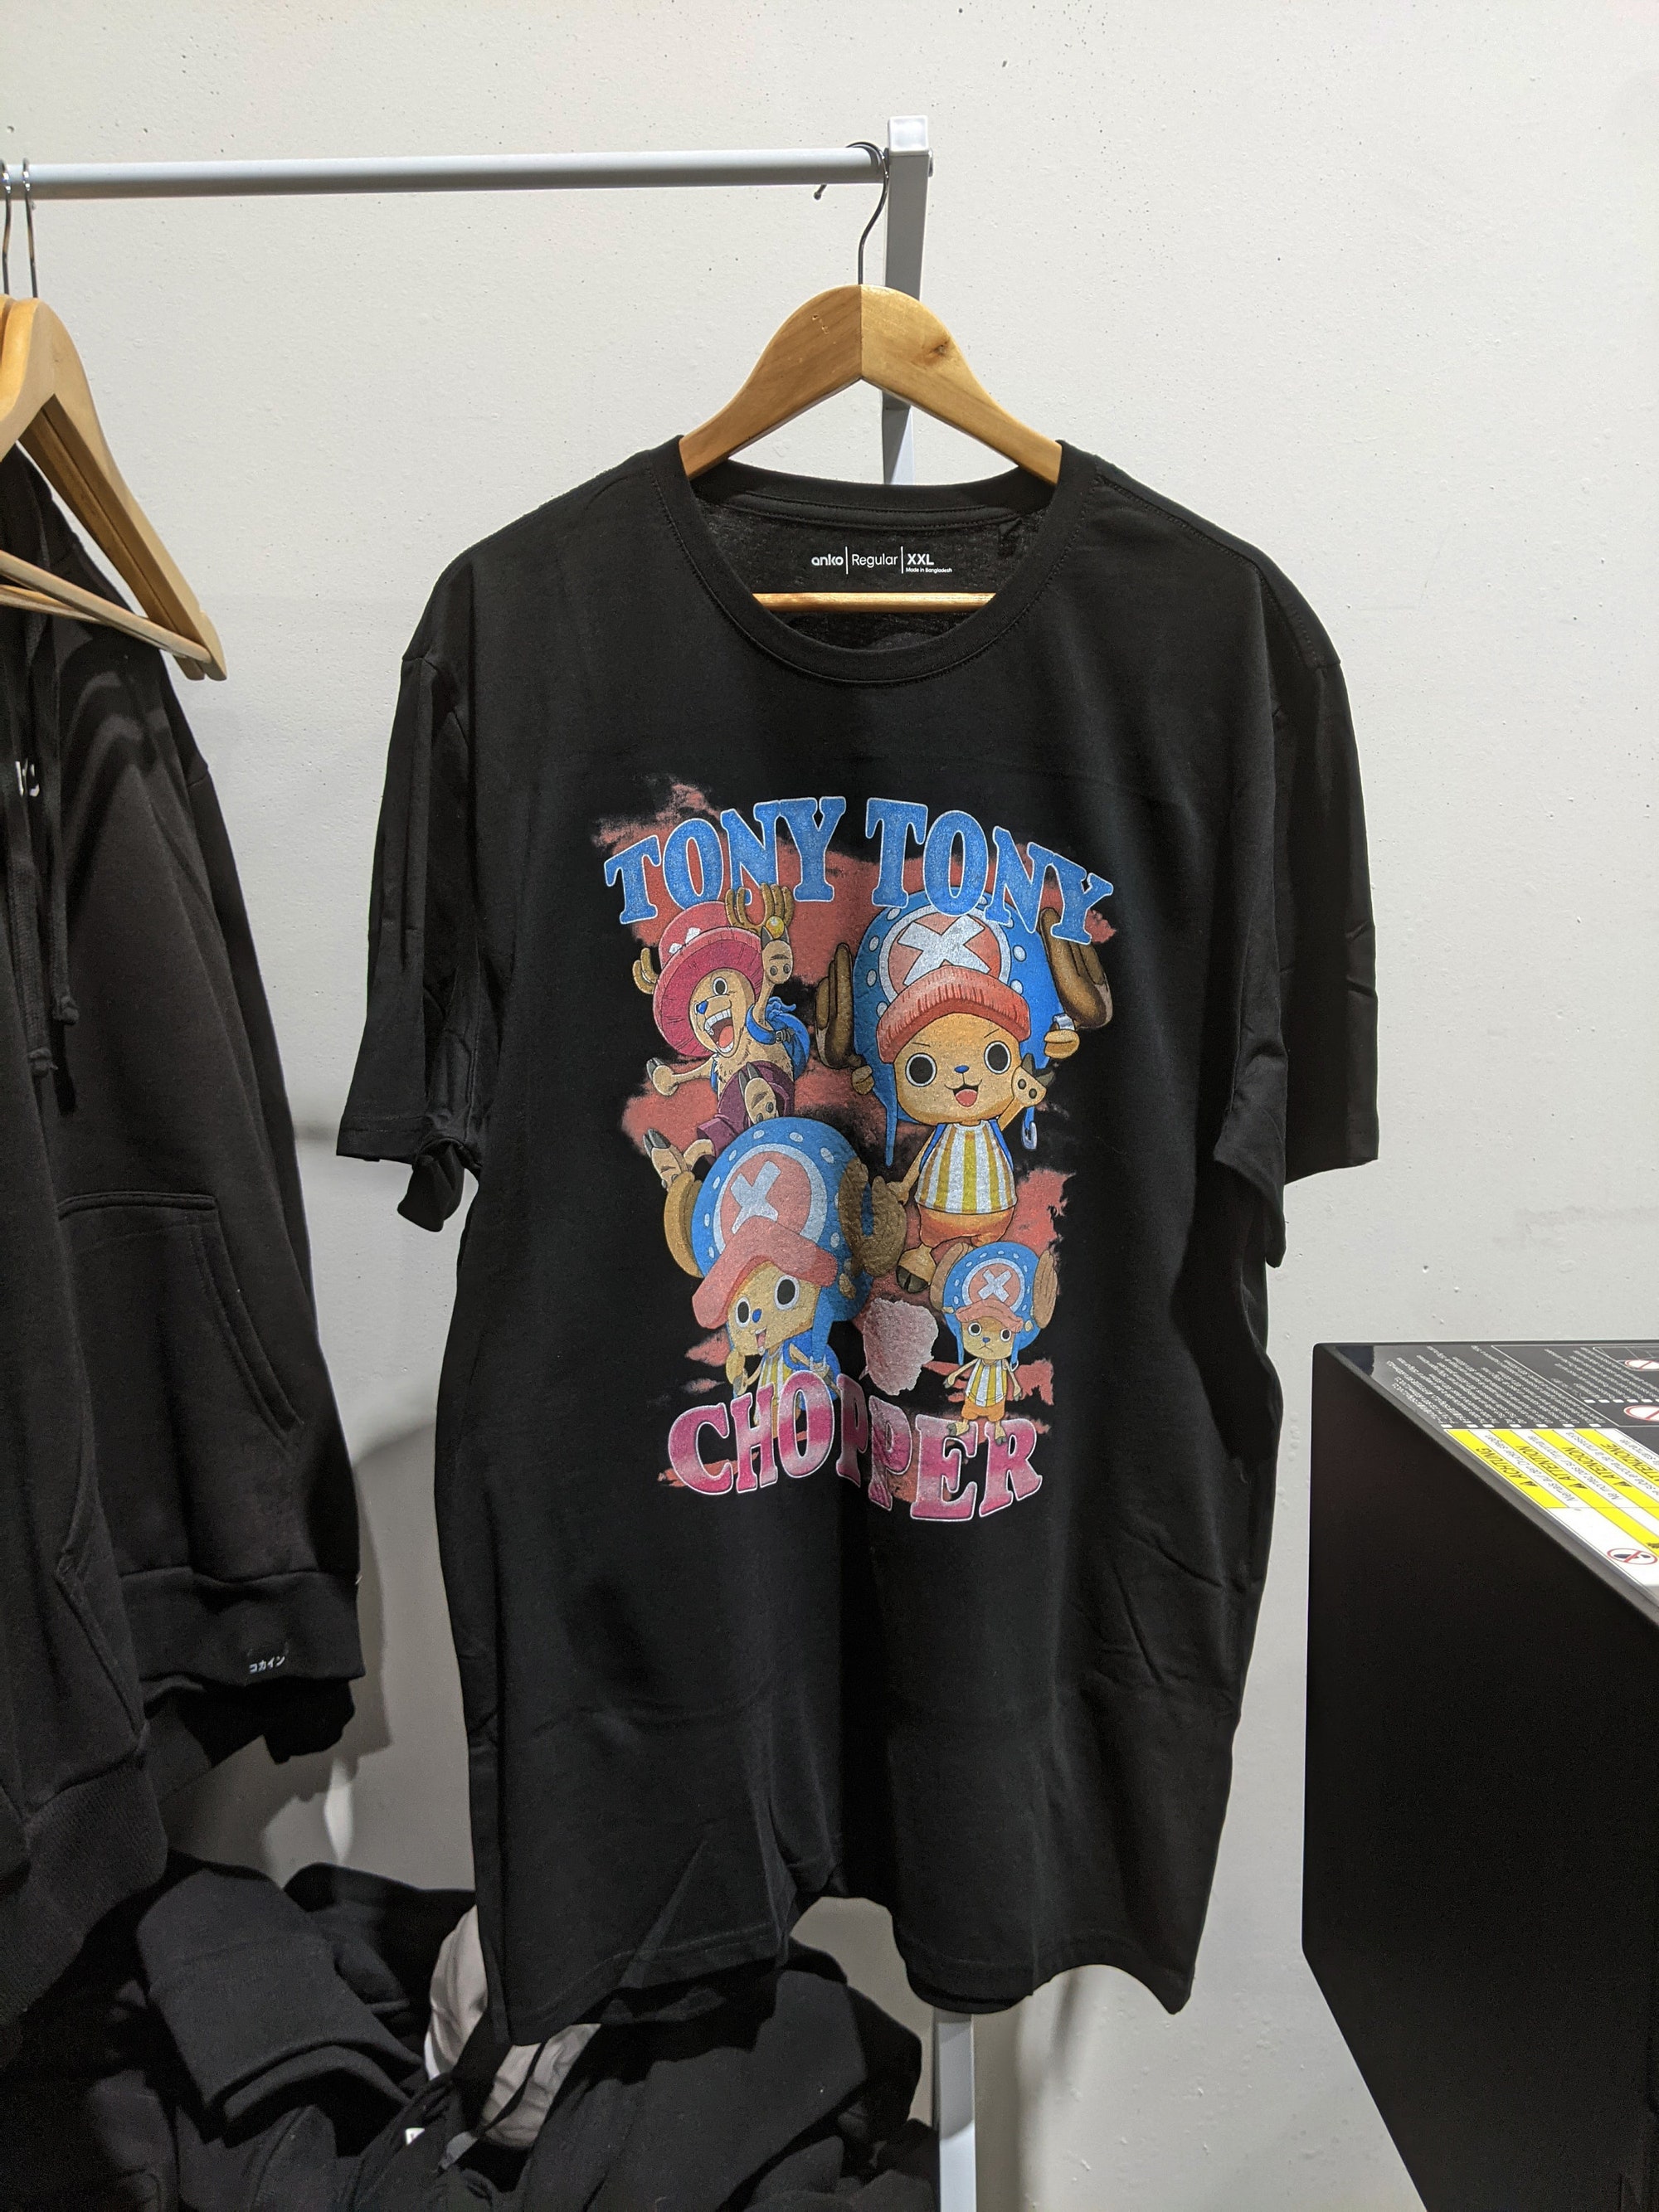 Discover Anime Vintage Style T-Shirt!